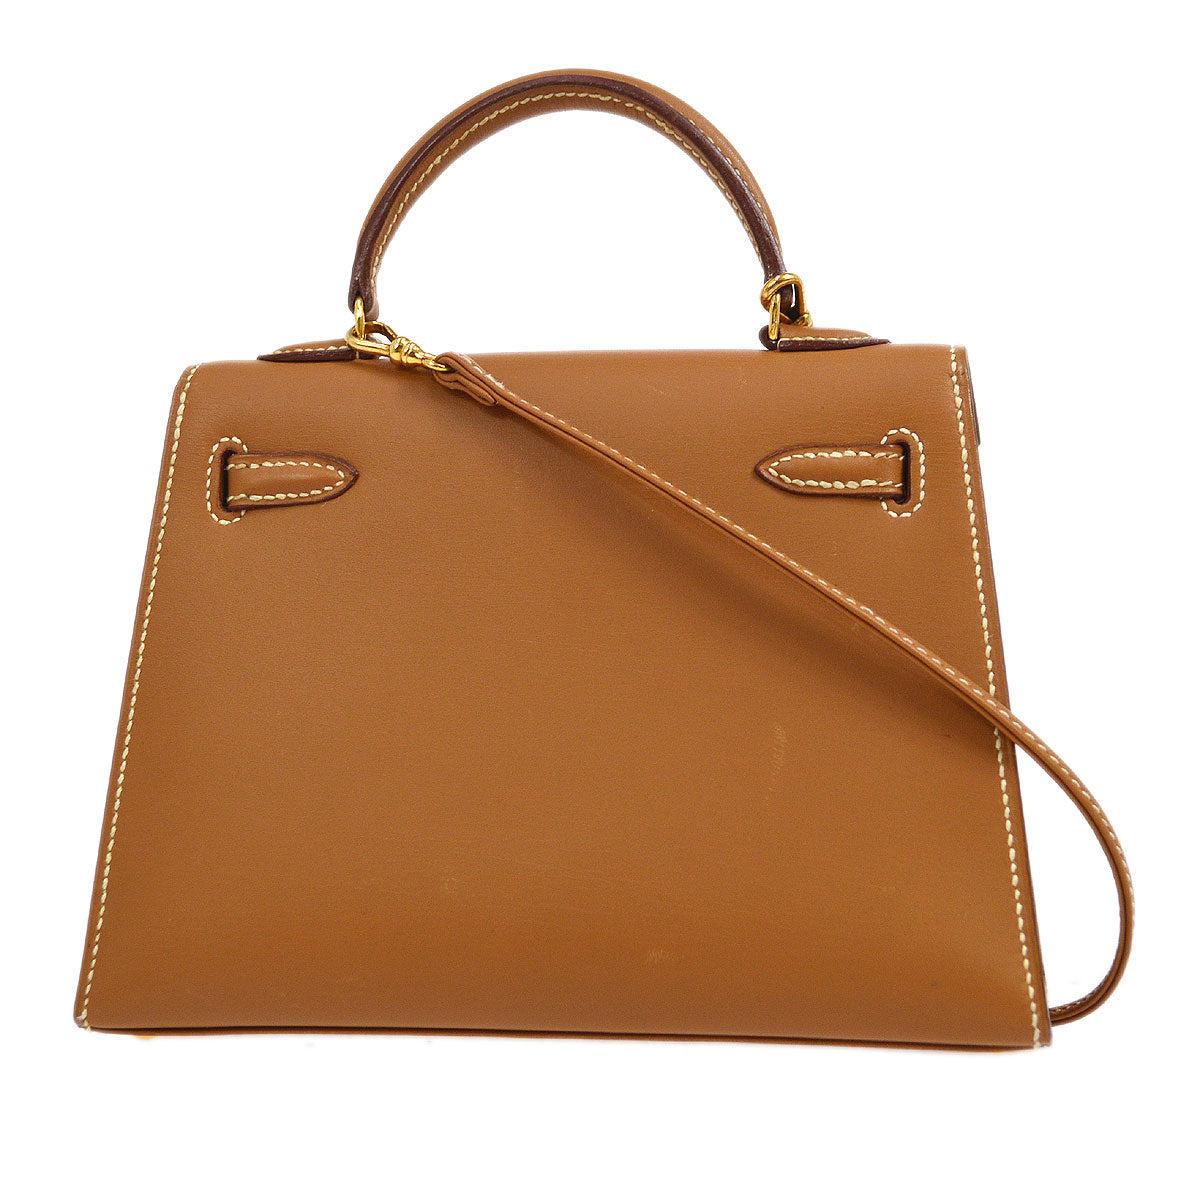 Pre-Owned Vintage Condition
From 2010 Collection
Veau Chamonix Leather
Gold Hardware
Includes  Dust Bag
W 5.7 x H 4.3 x D 1.8 